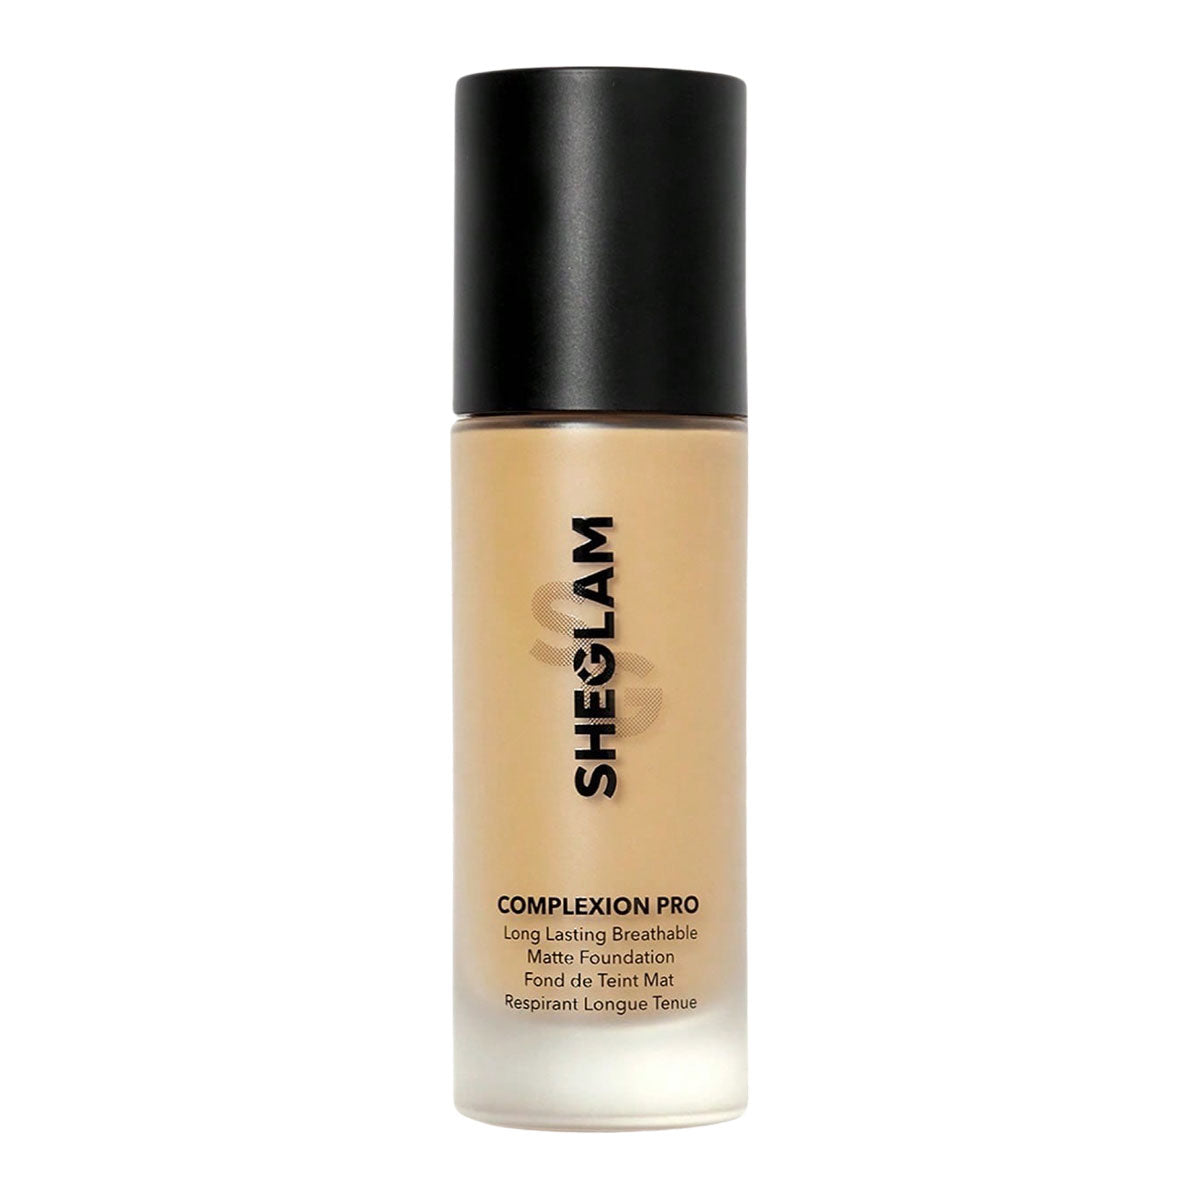 SheGlam Complexion Pro Long Lasting Breathable Matte Foundation 30 ml